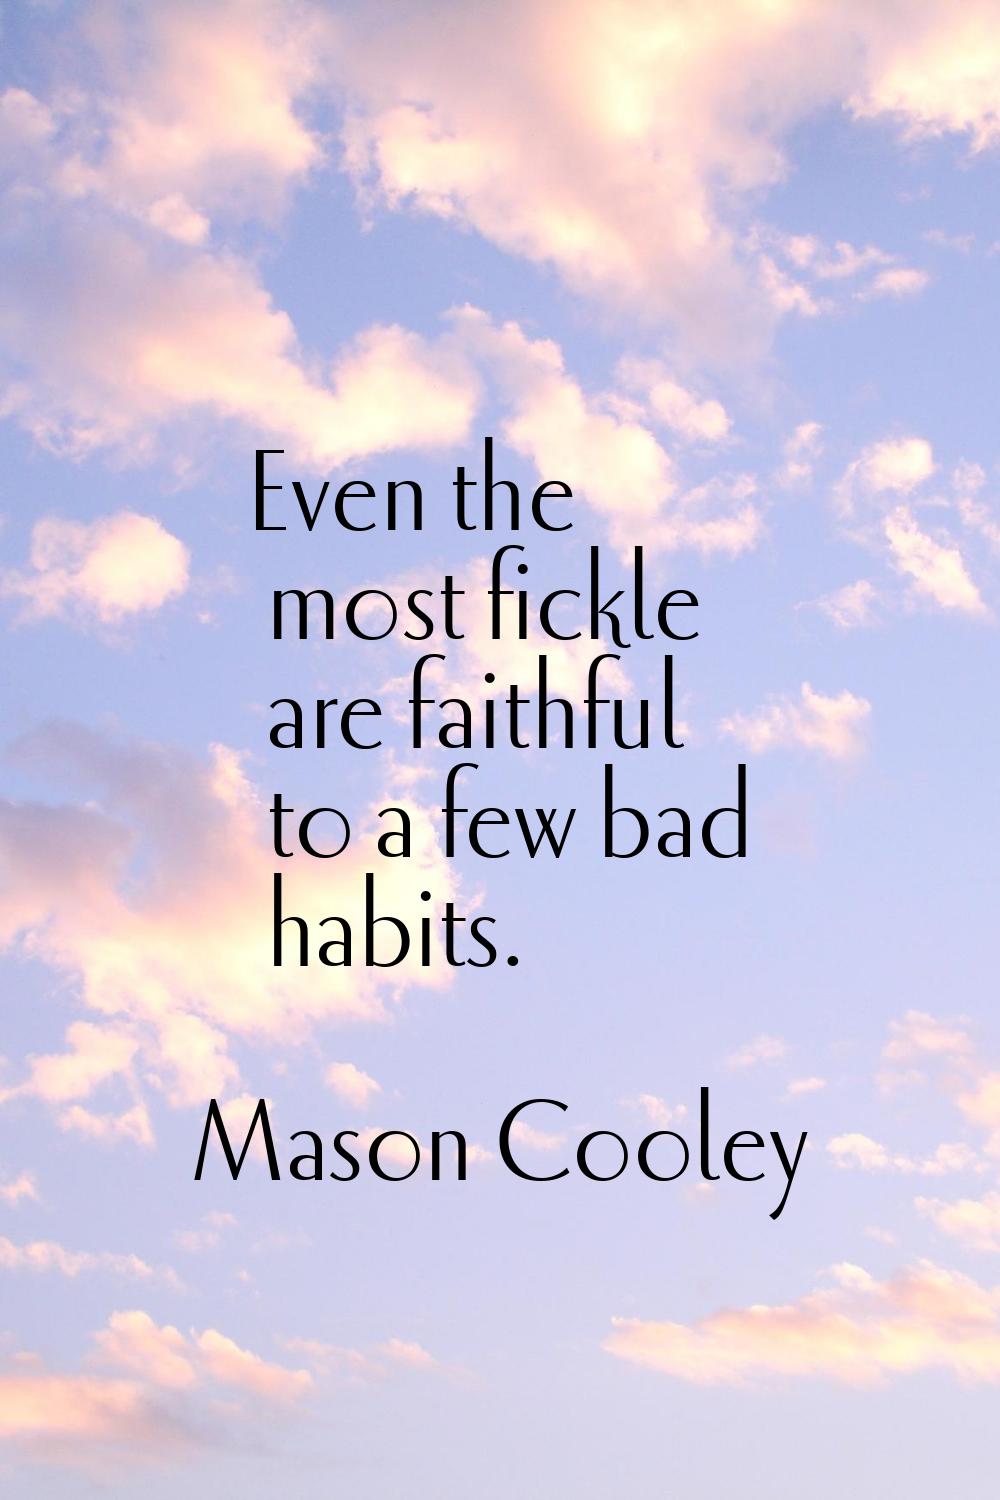 Even the most fickle are faithful to a few bad habits.